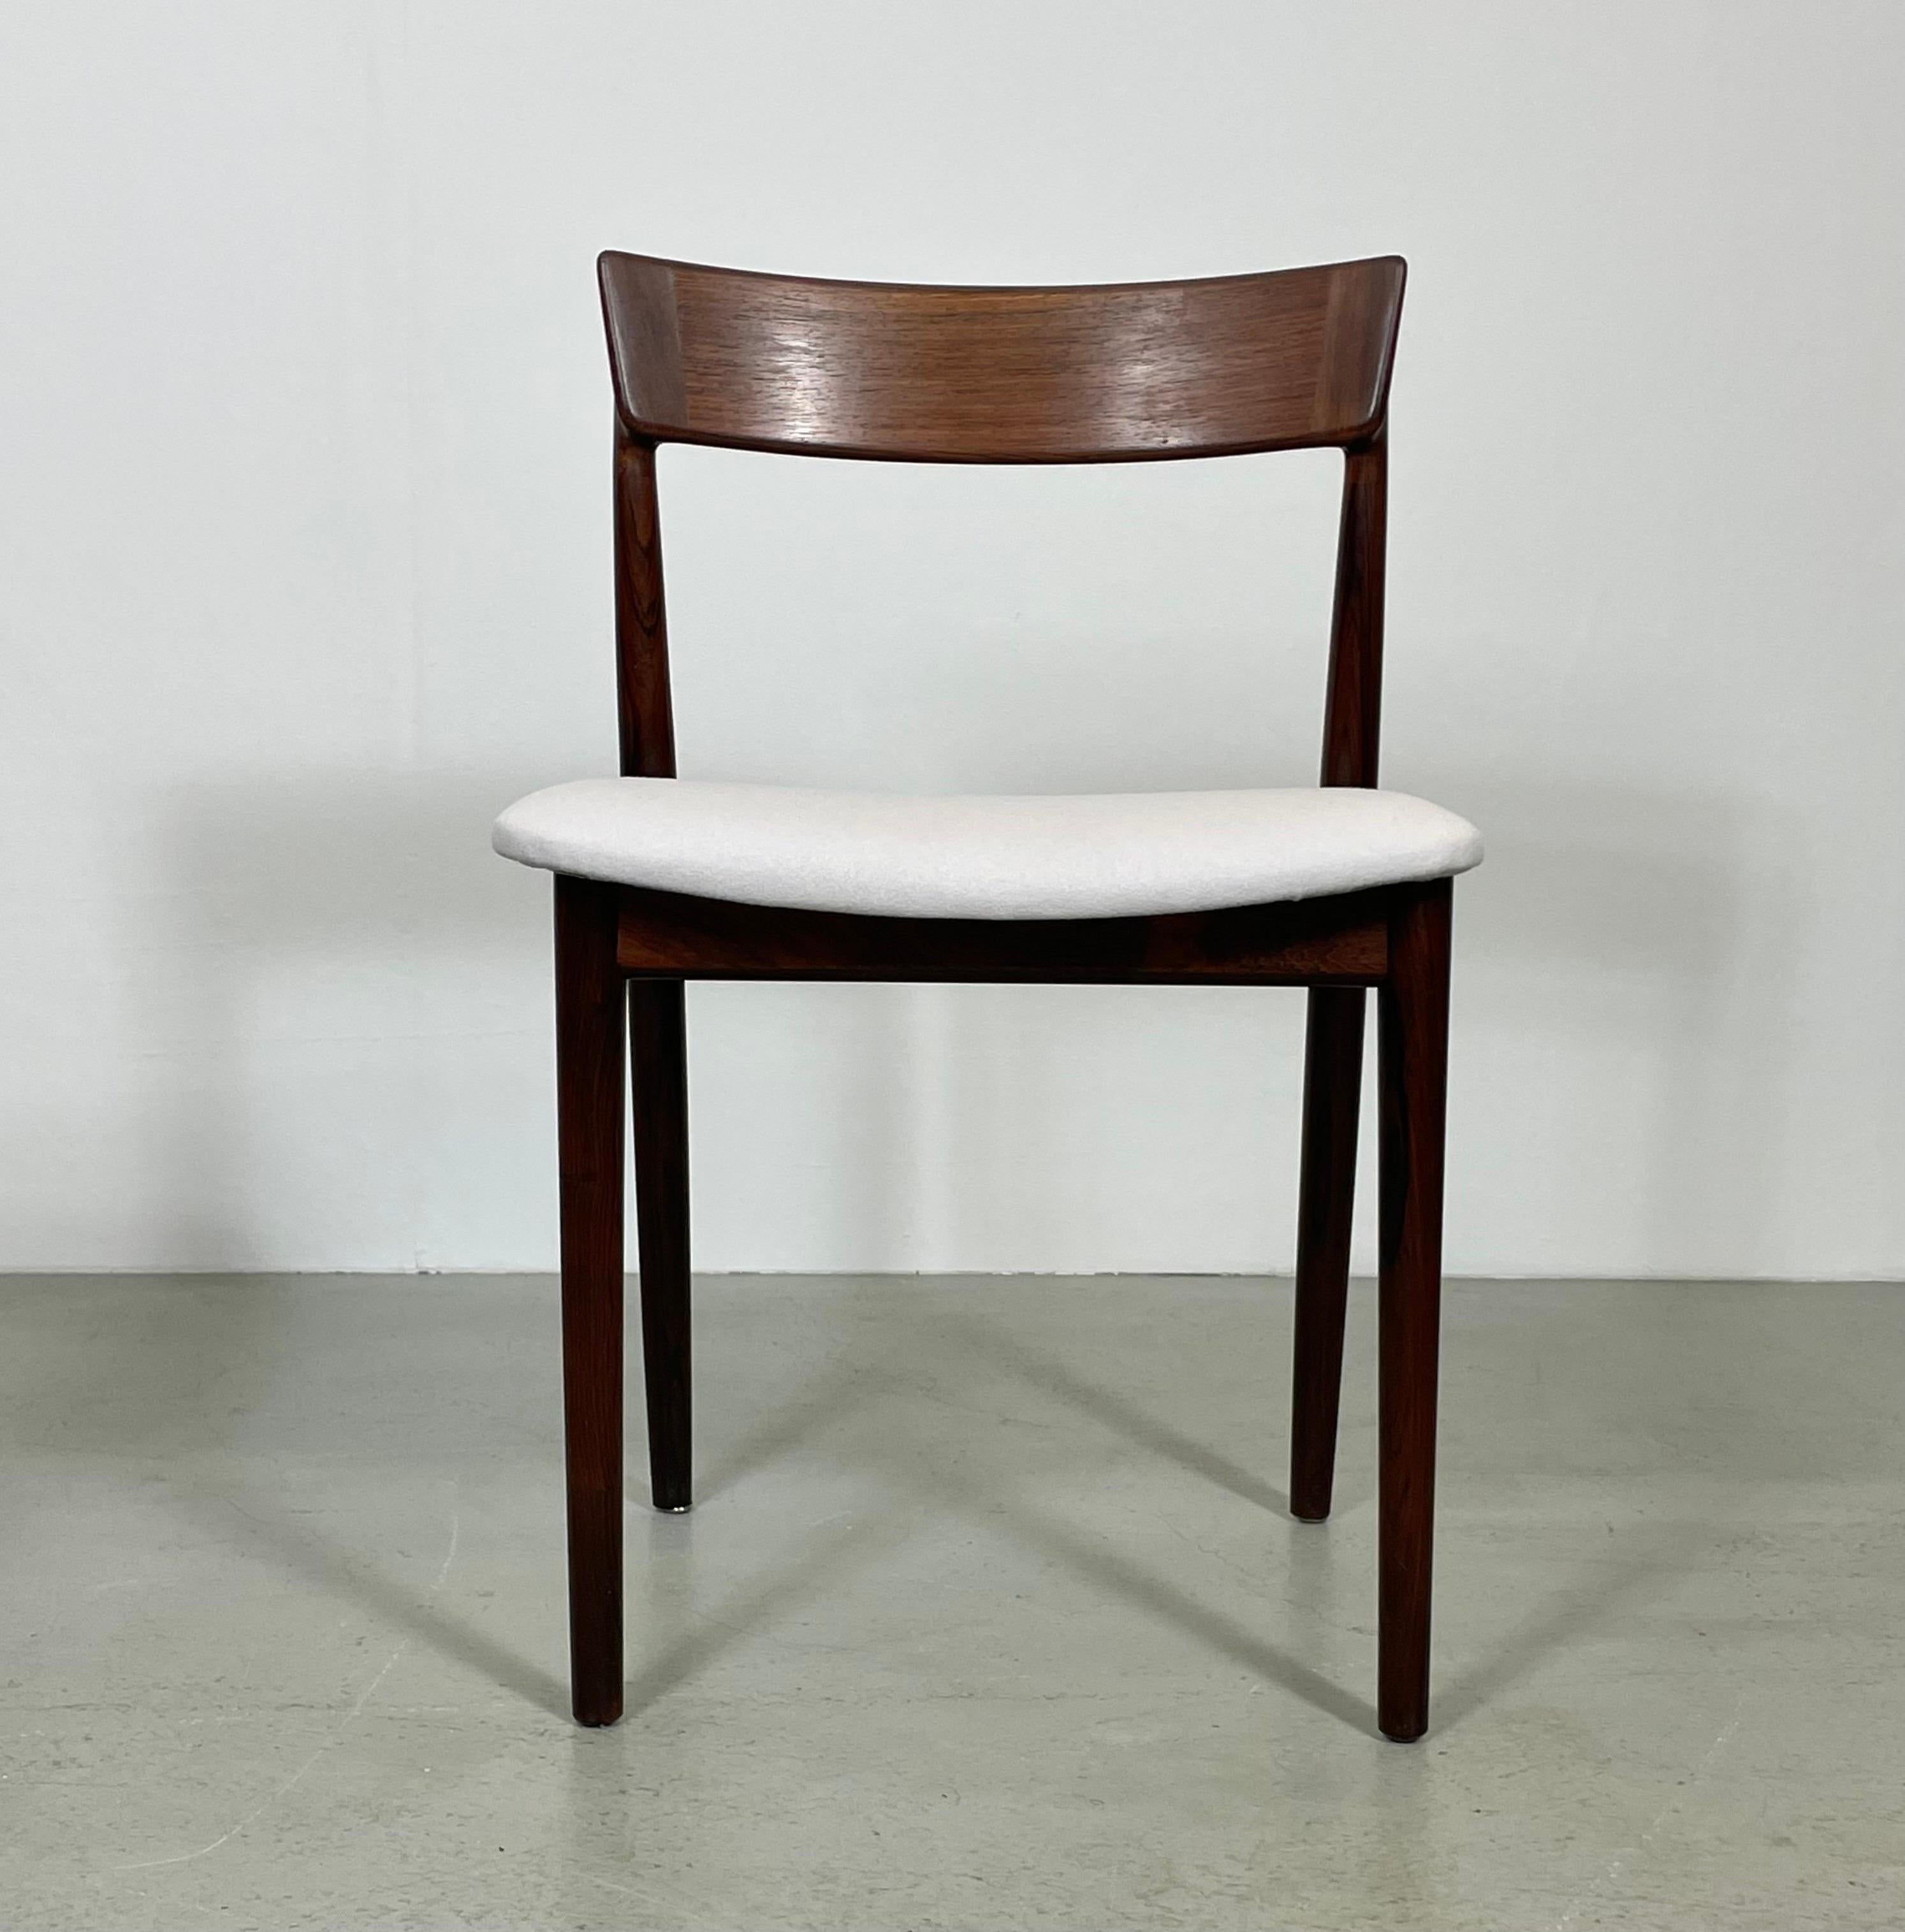 This rare set of 4 chairs was design by Henry Rosengren Hansen for Brande Møbelindustri. It was produced in Denmark in the 1960s. The dining chairs are made of solid rosewood the seat has been restored and feature an elegant cover im light-grey wool